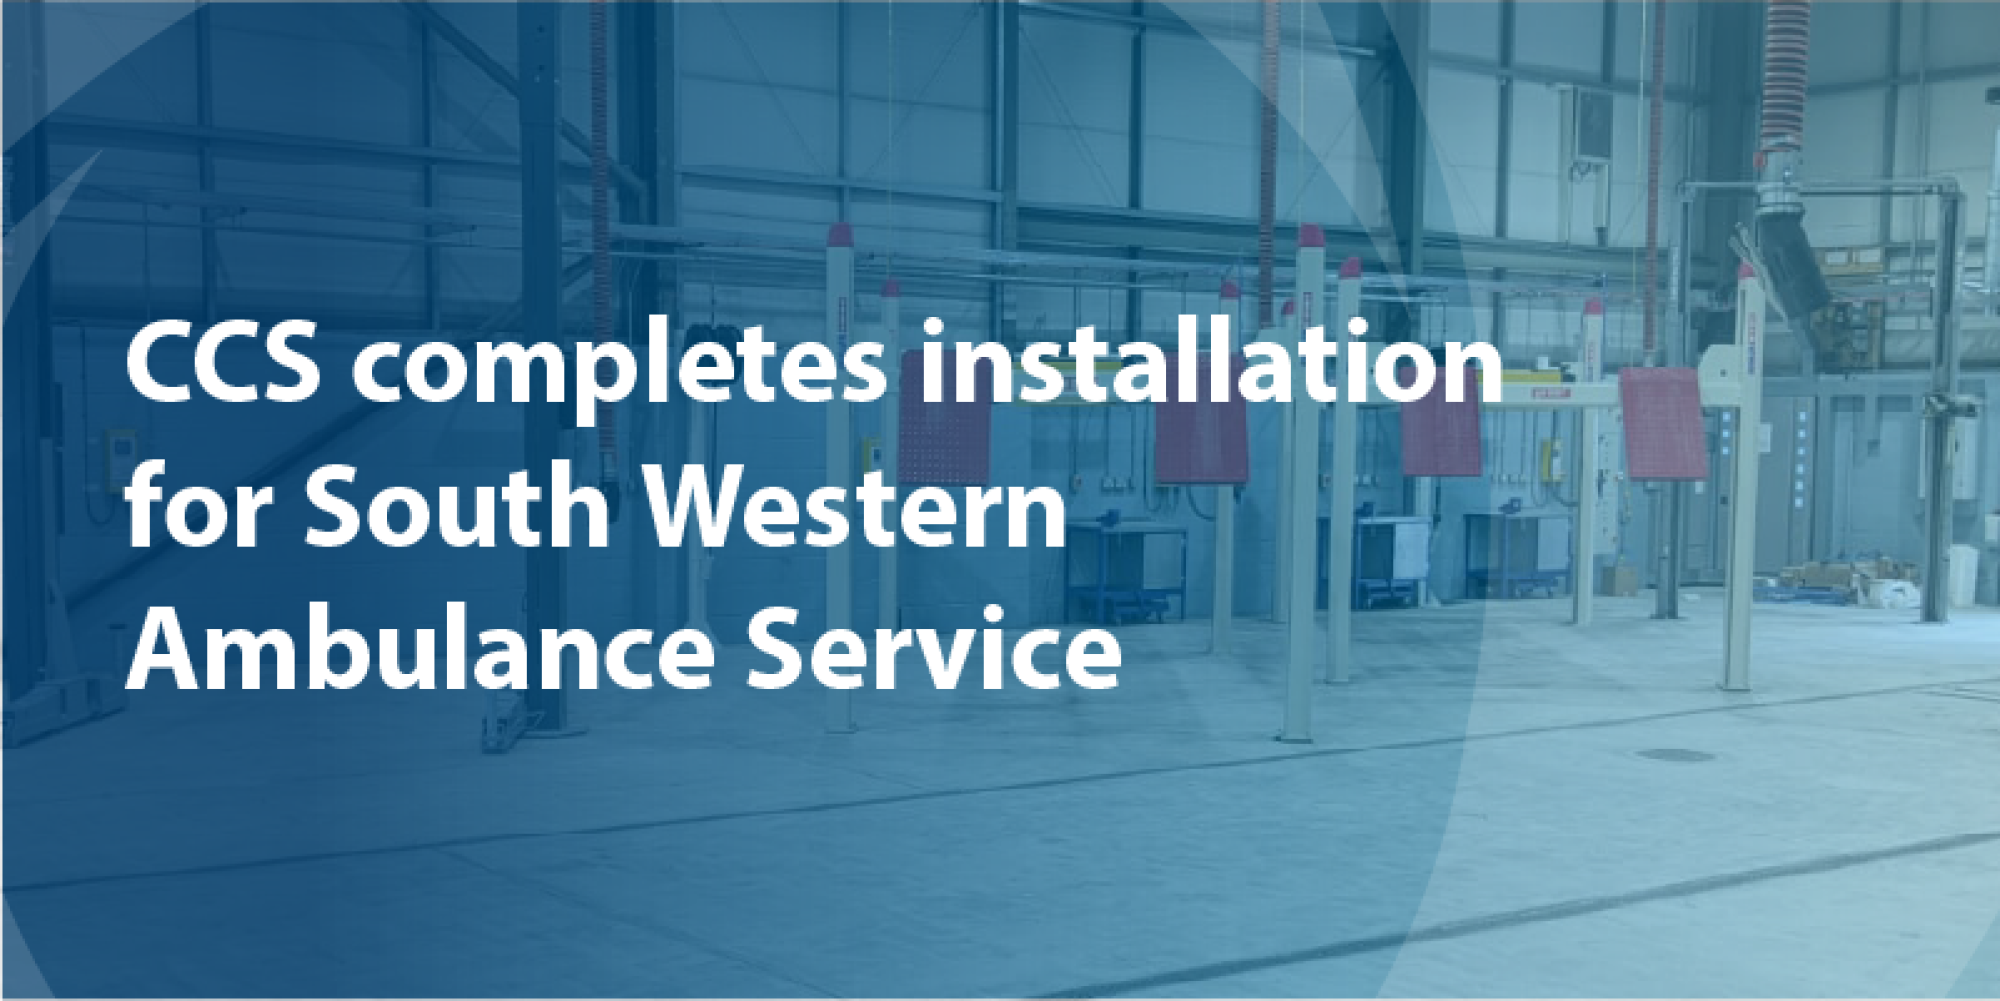 CCS completes garage equipment installation for South Western Ambulance Service